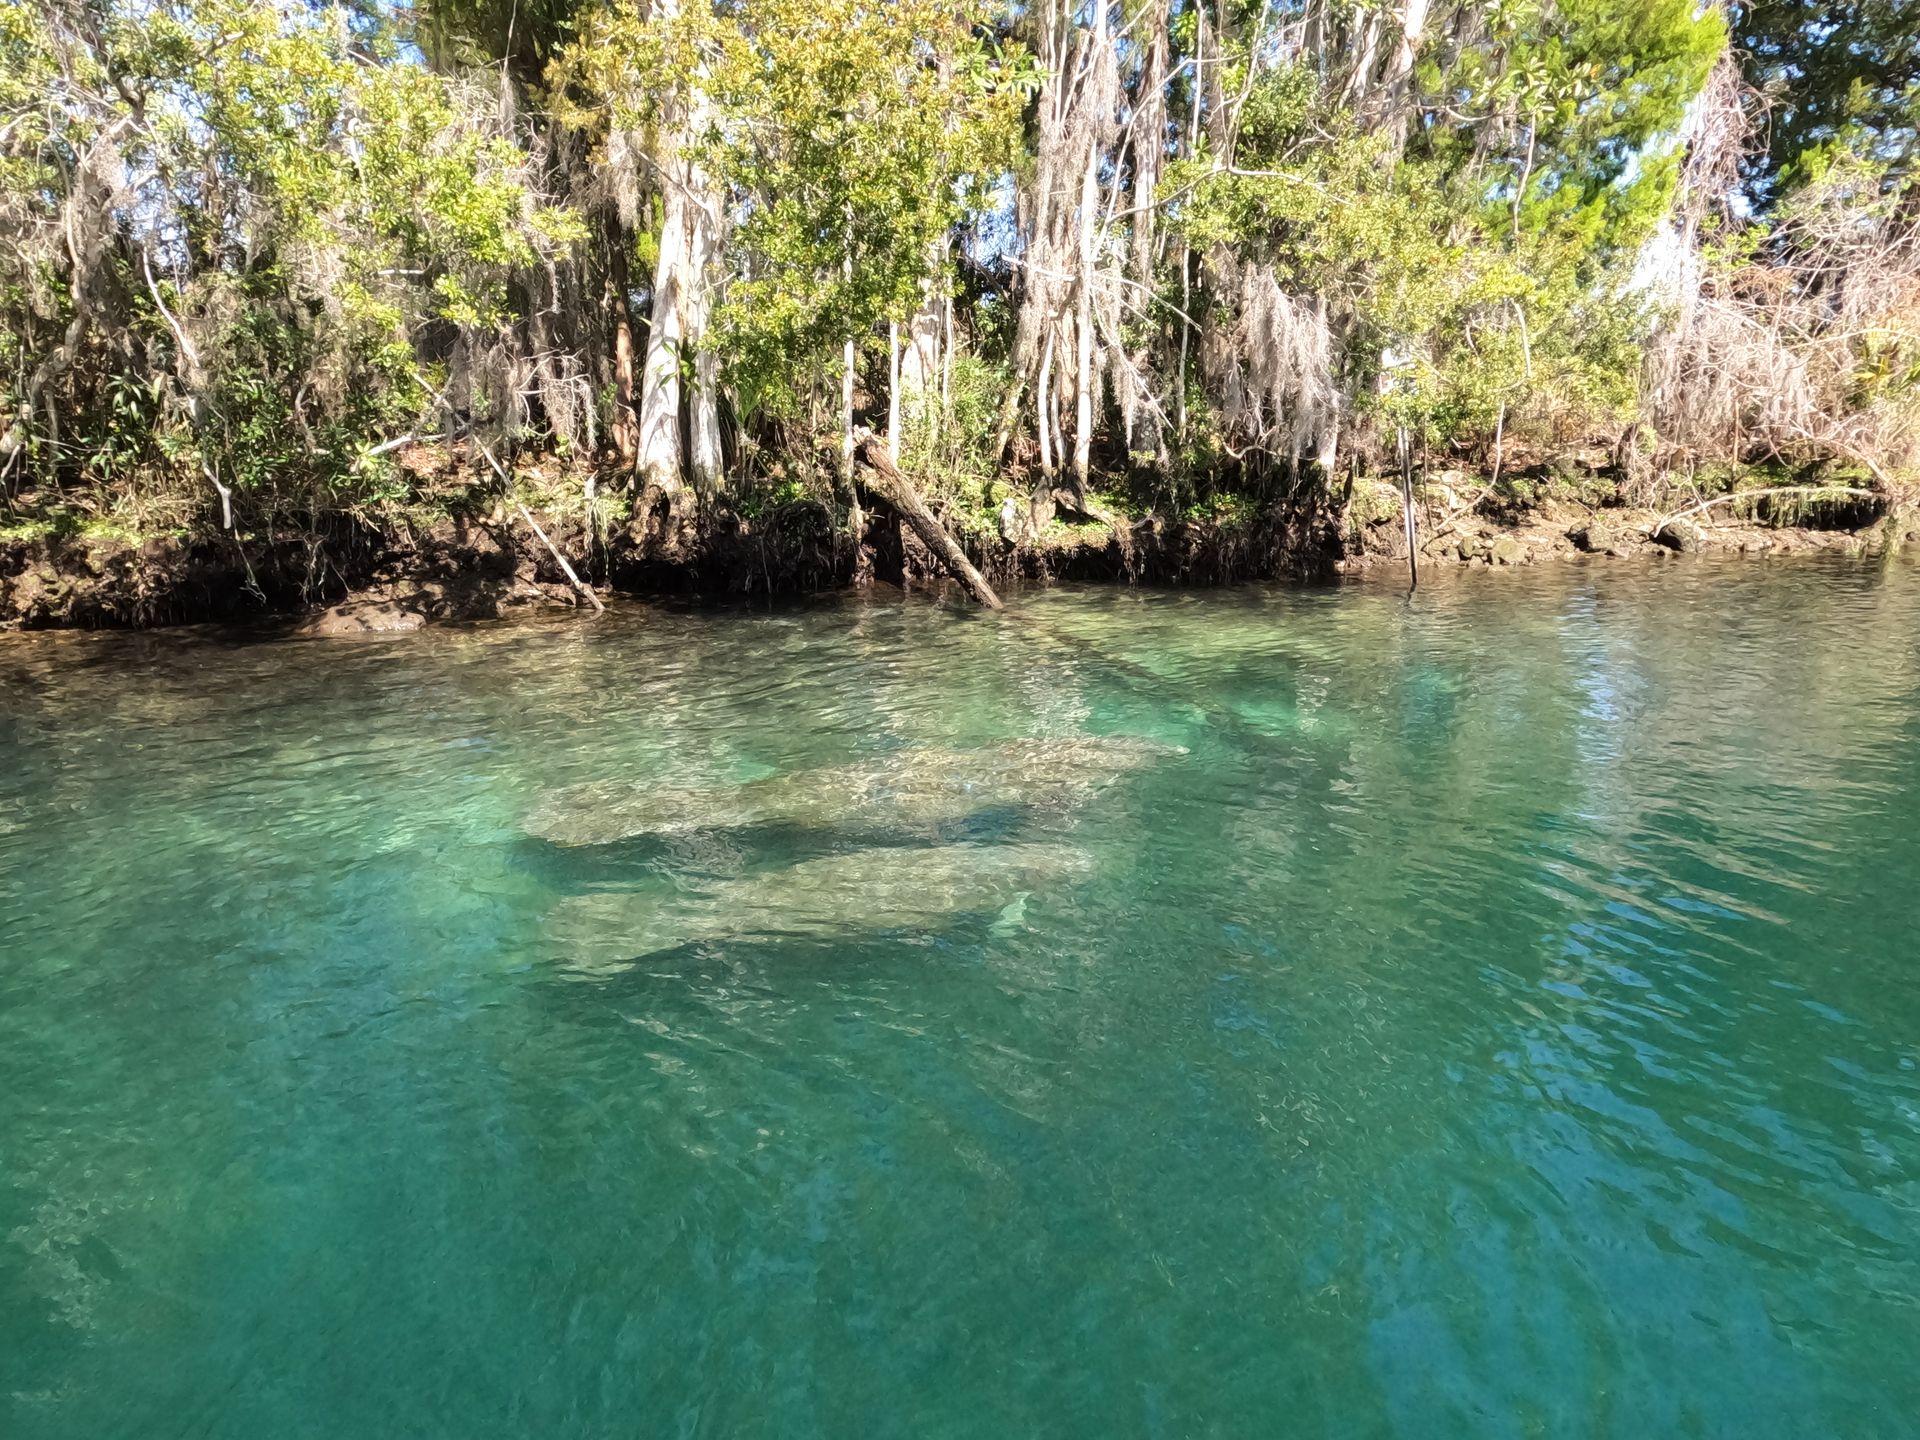 Two manatees swimming near the surface in Crystal River.